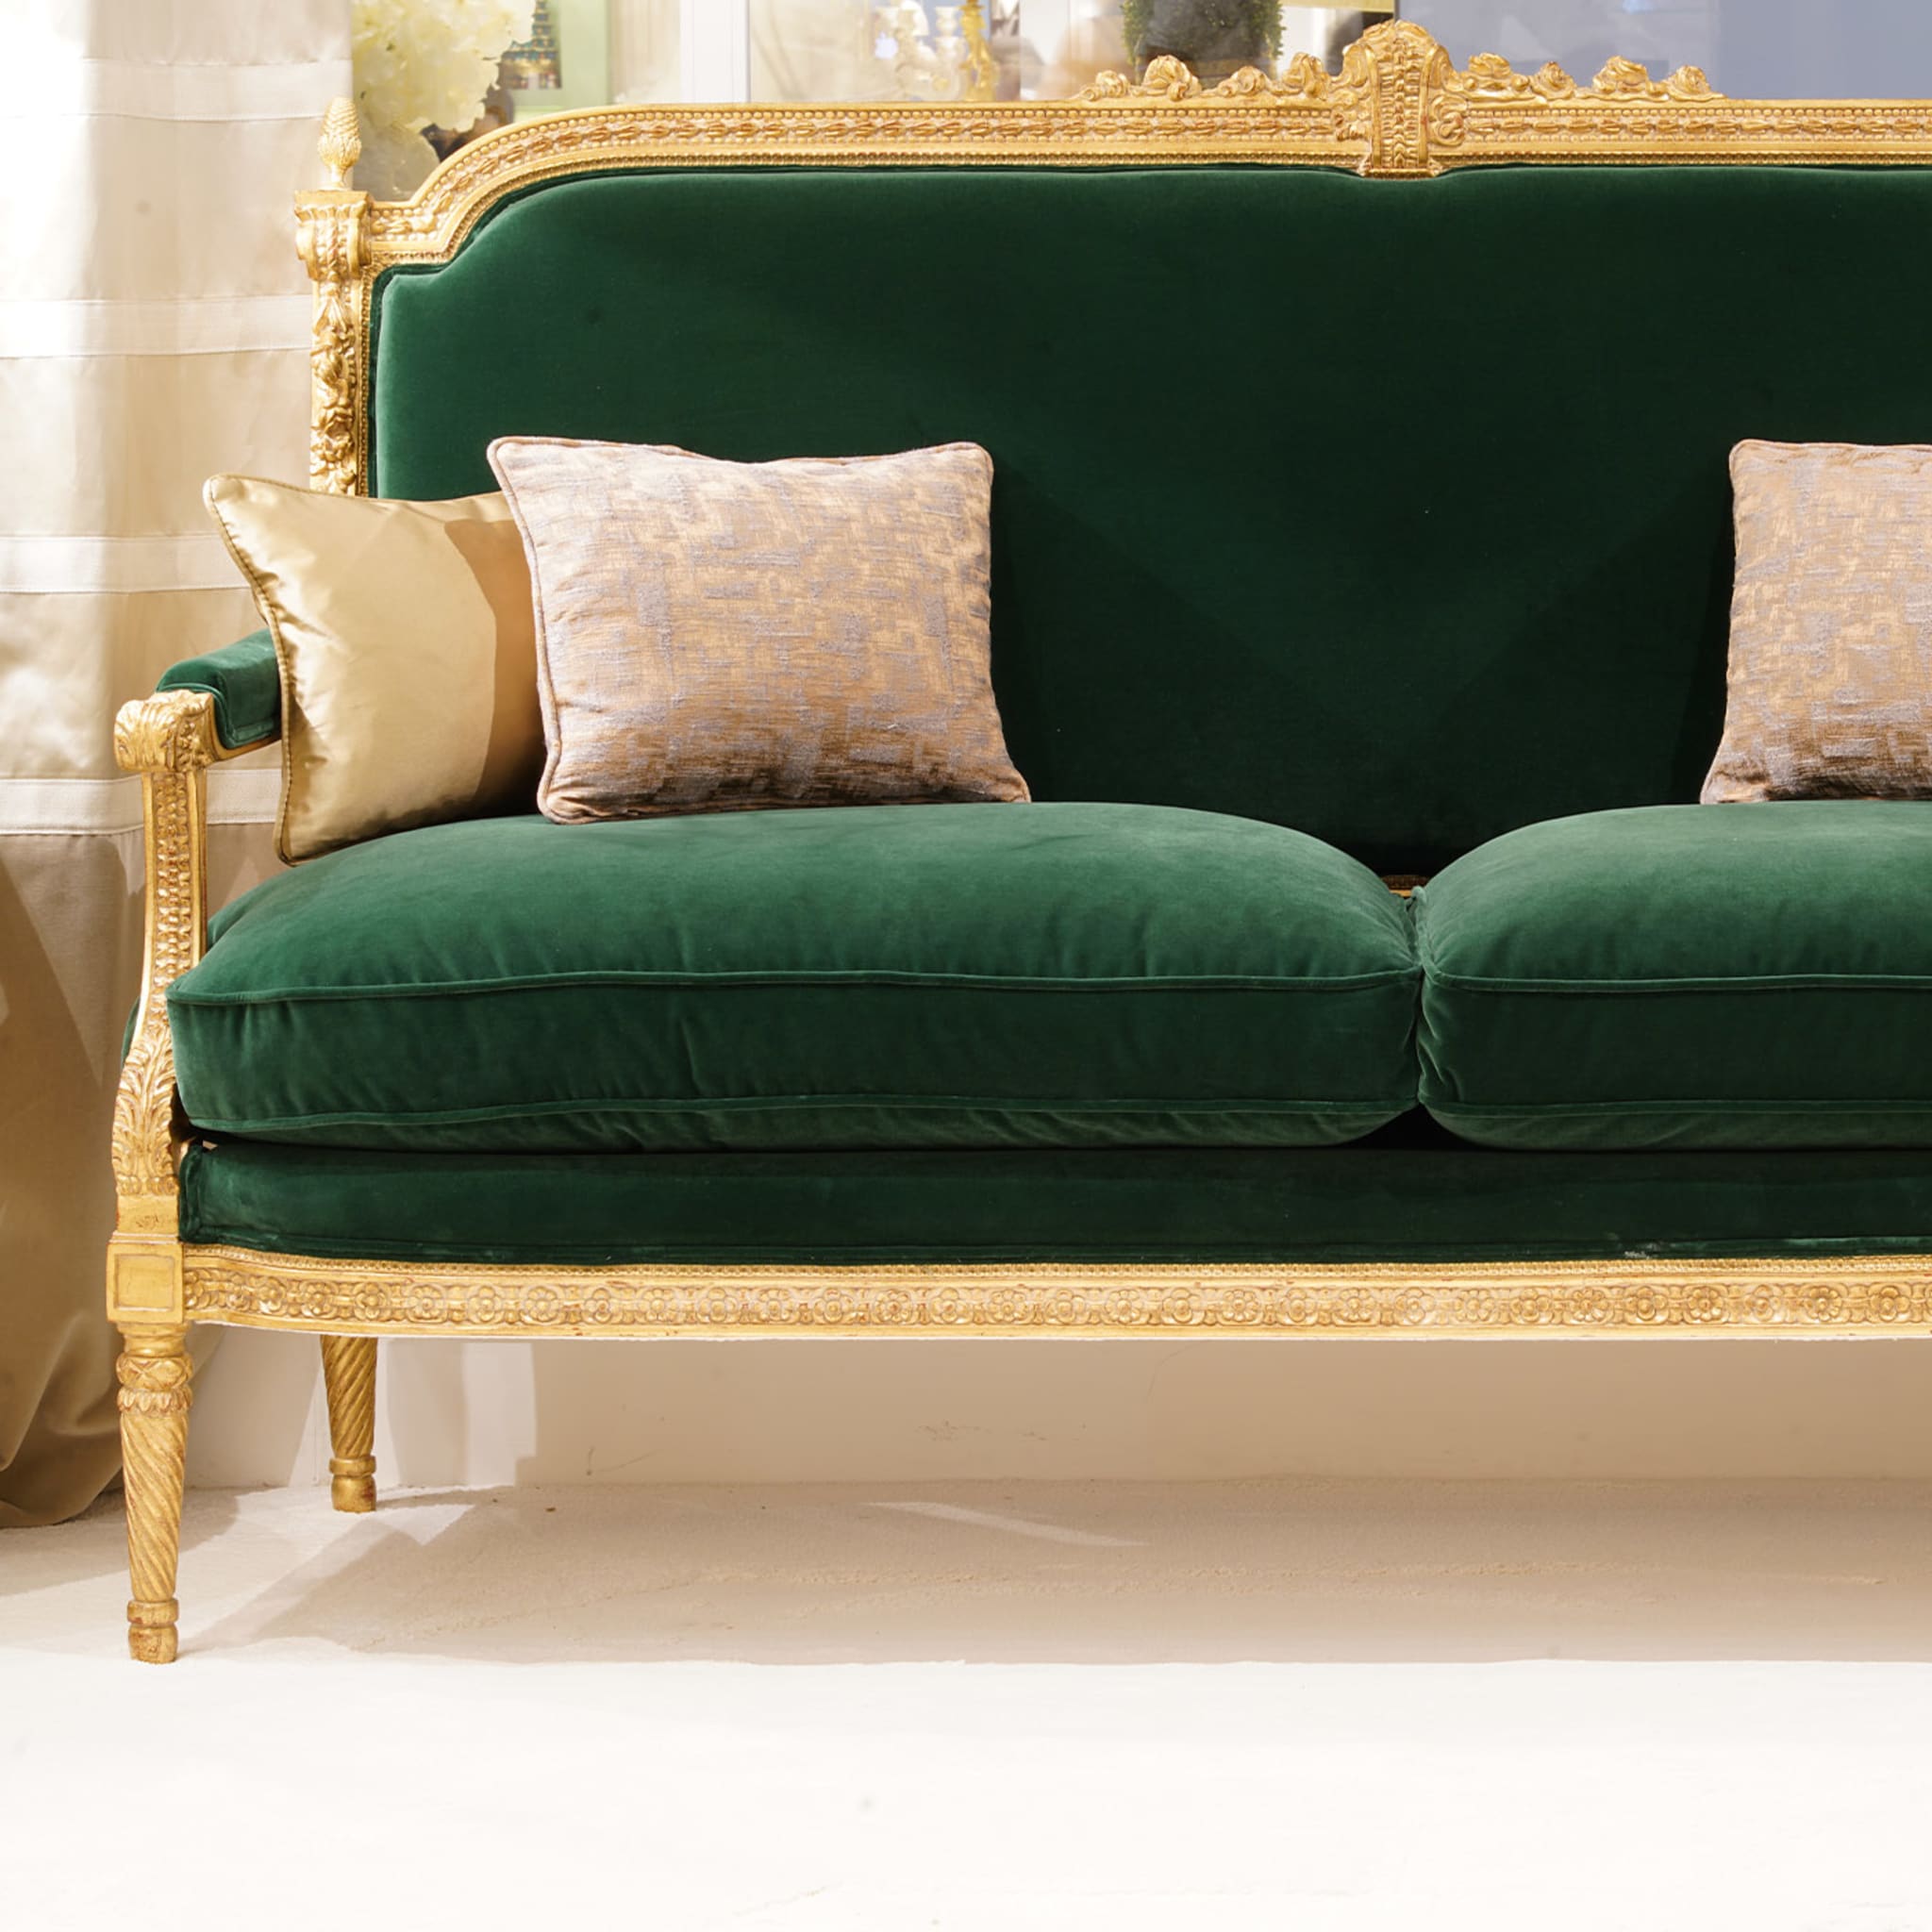 Lous XVI-Style Green and Gold Sofa - Alternative view 2